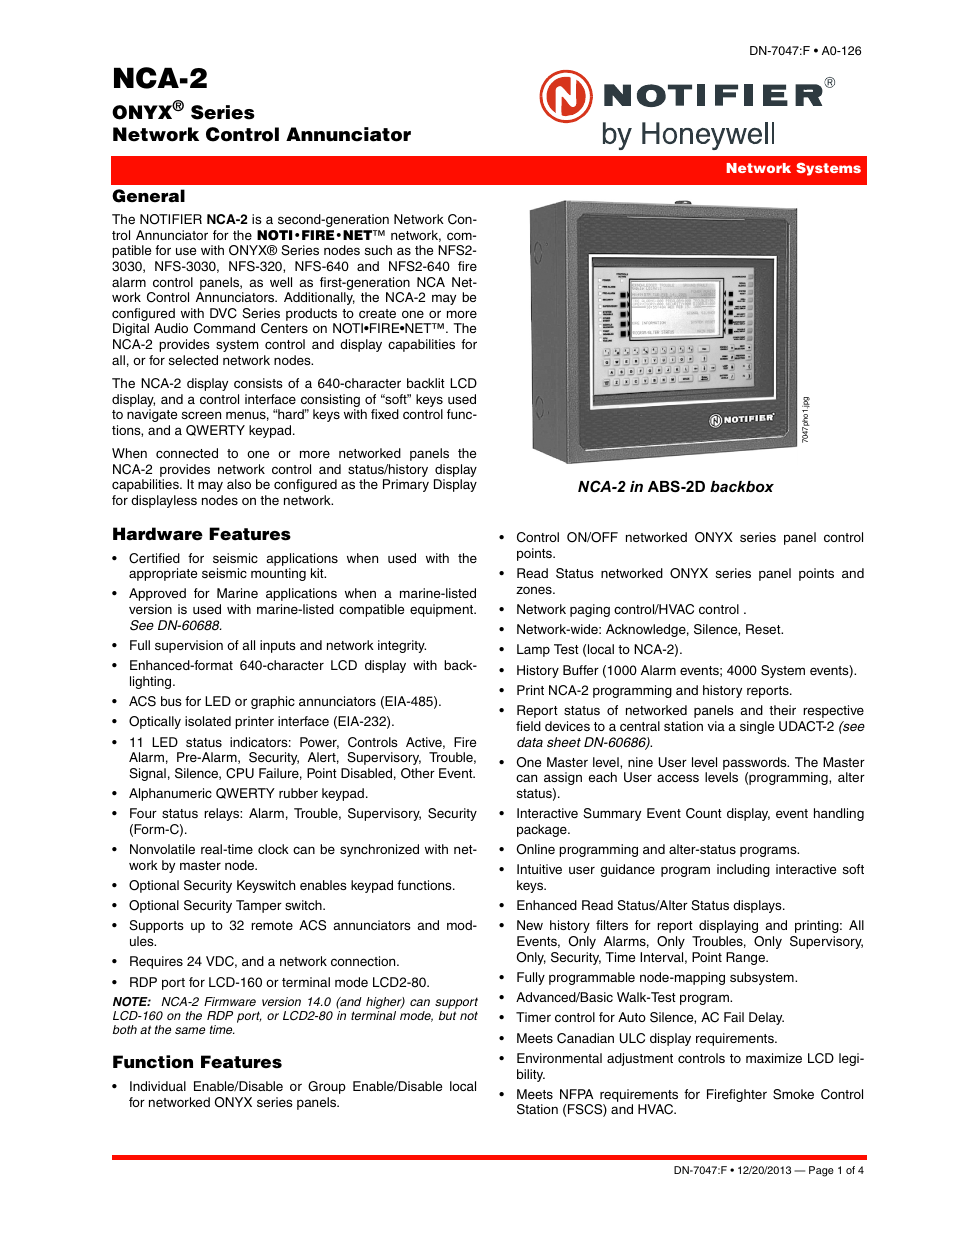 Notifier NCA-2 User Manual | 4 pages